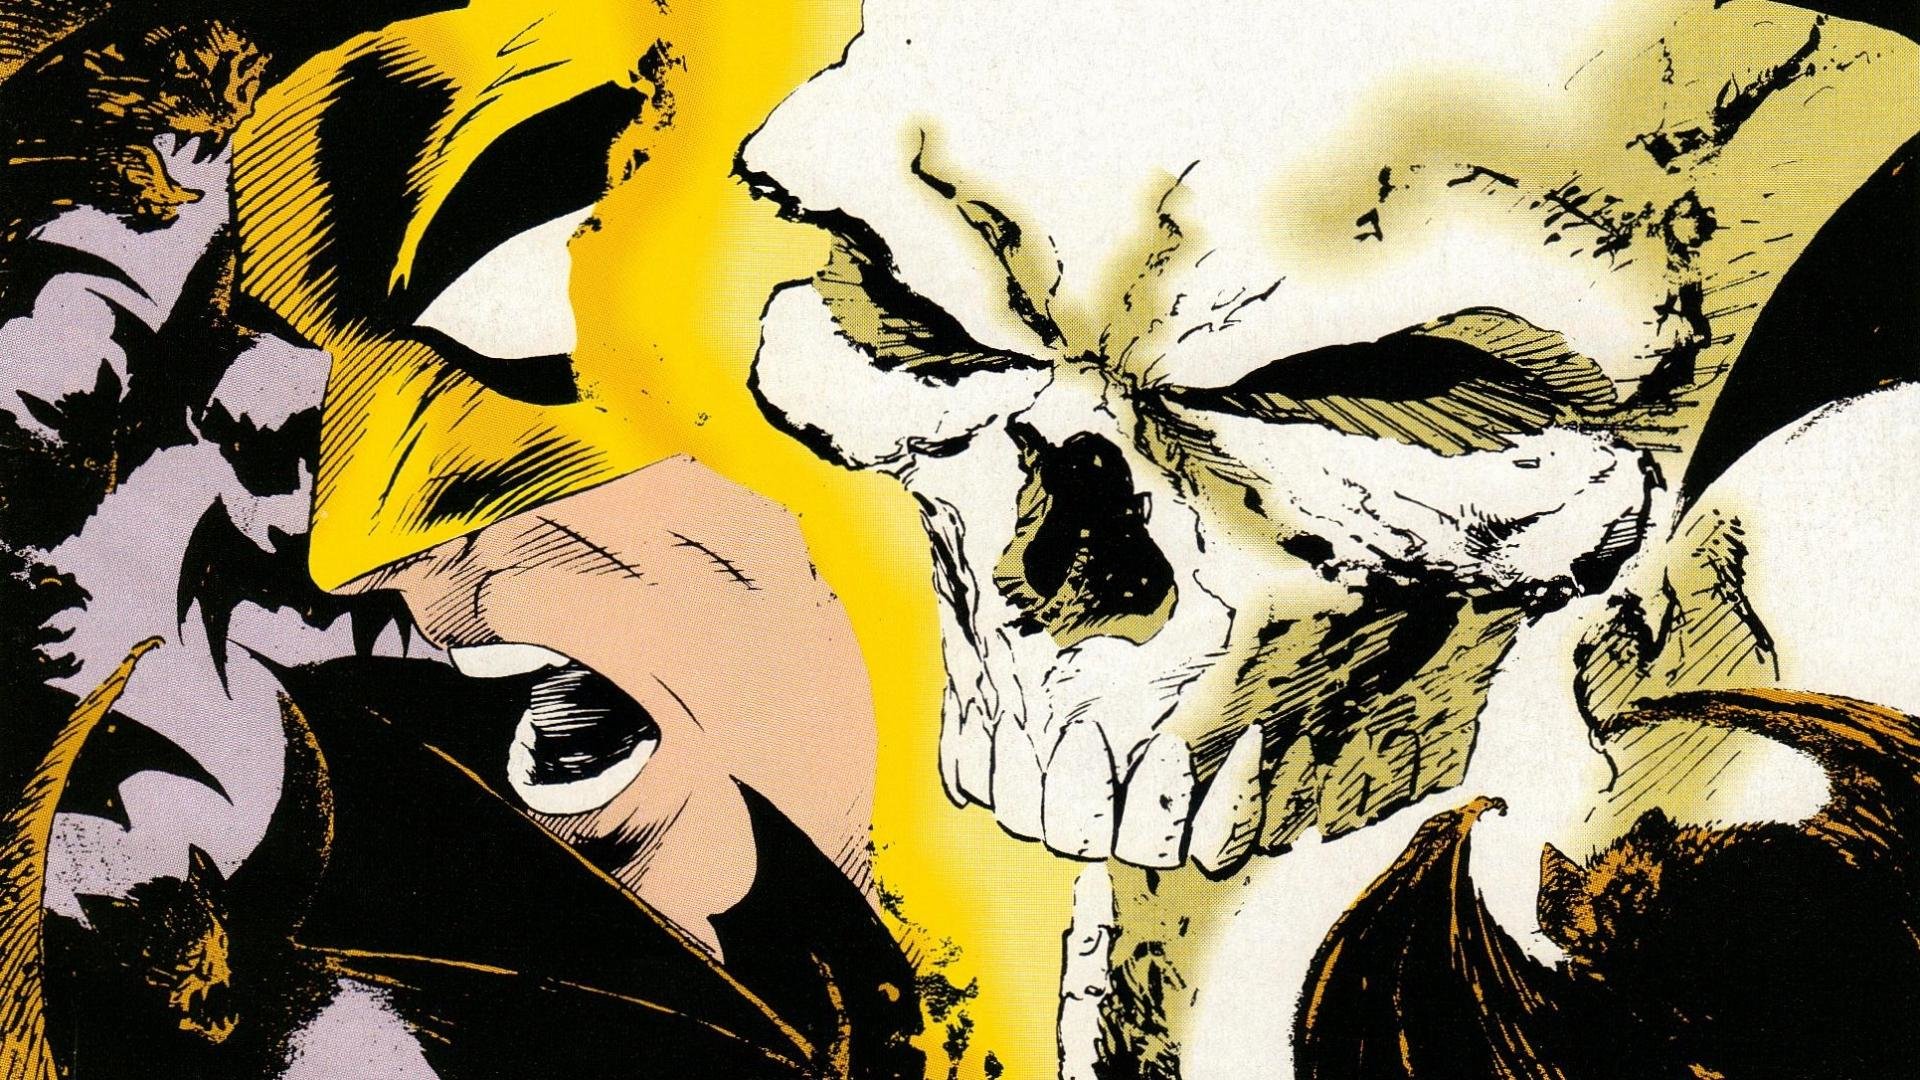 High Resolution Ghost Rider Hd Wallpaper Id - Marvel Comics Presents Ghost Rider And Iron Fist - HD Wallpaper 